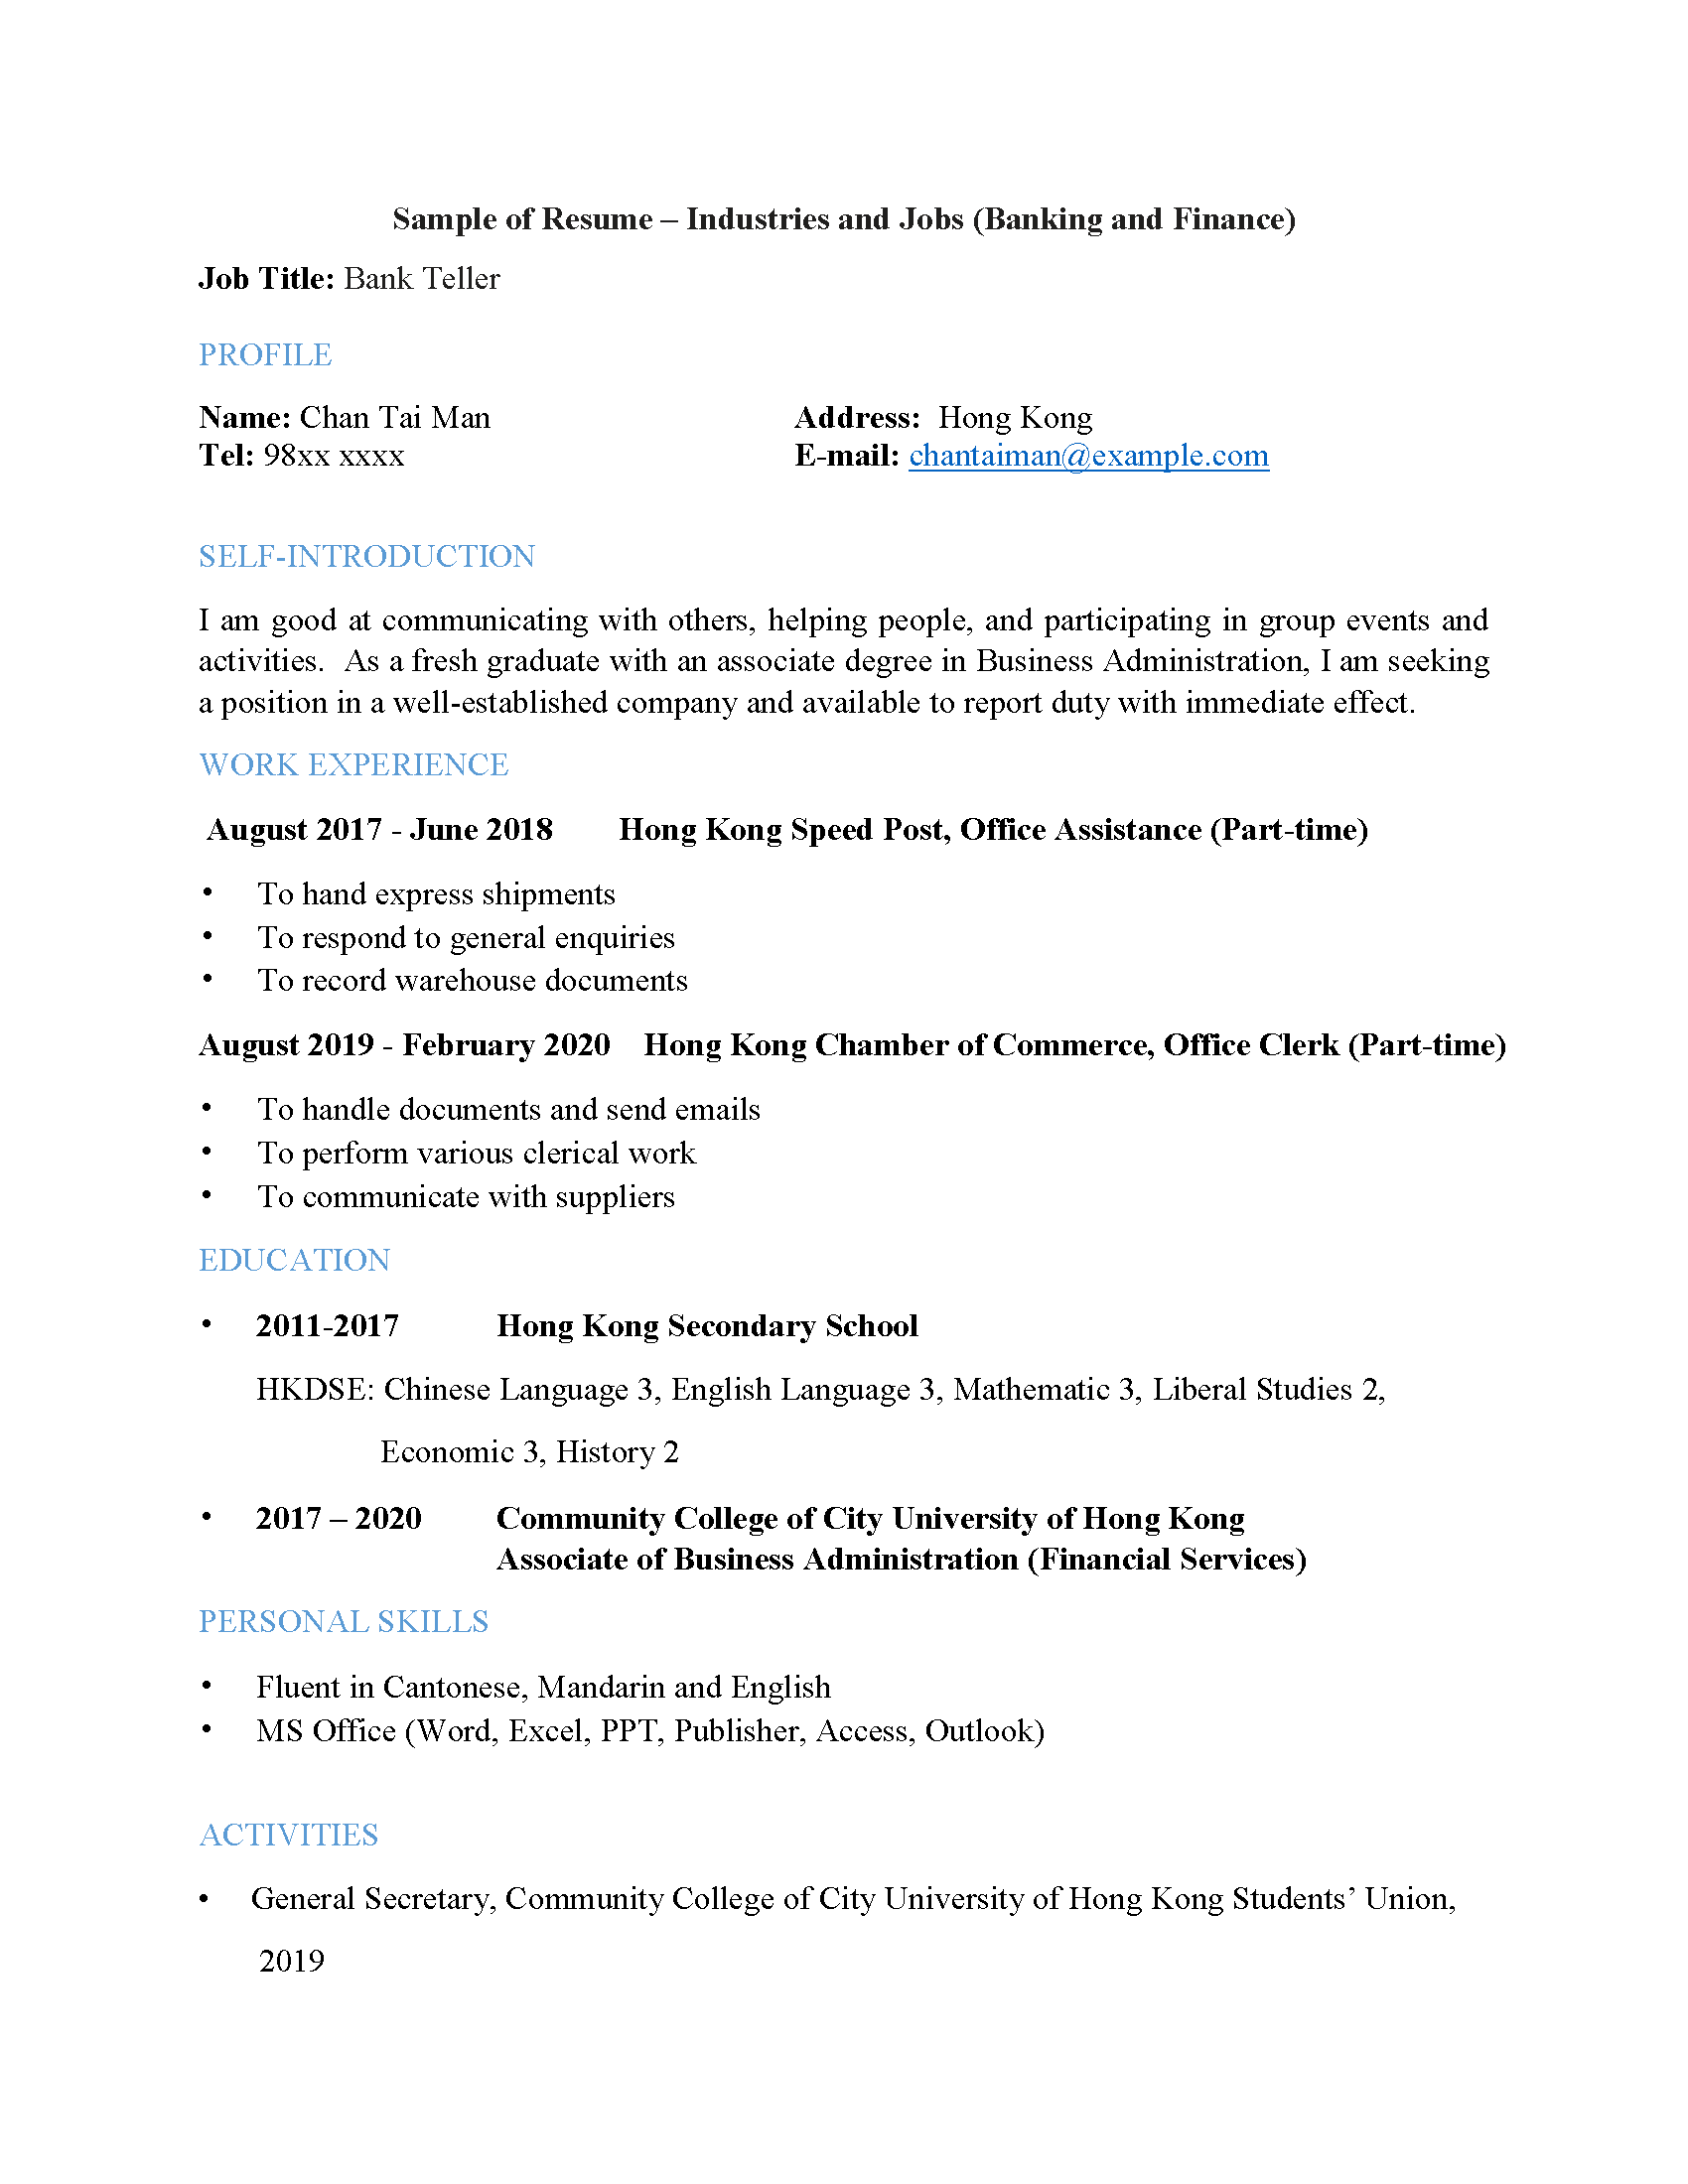 Banking and Finance Resume Sample